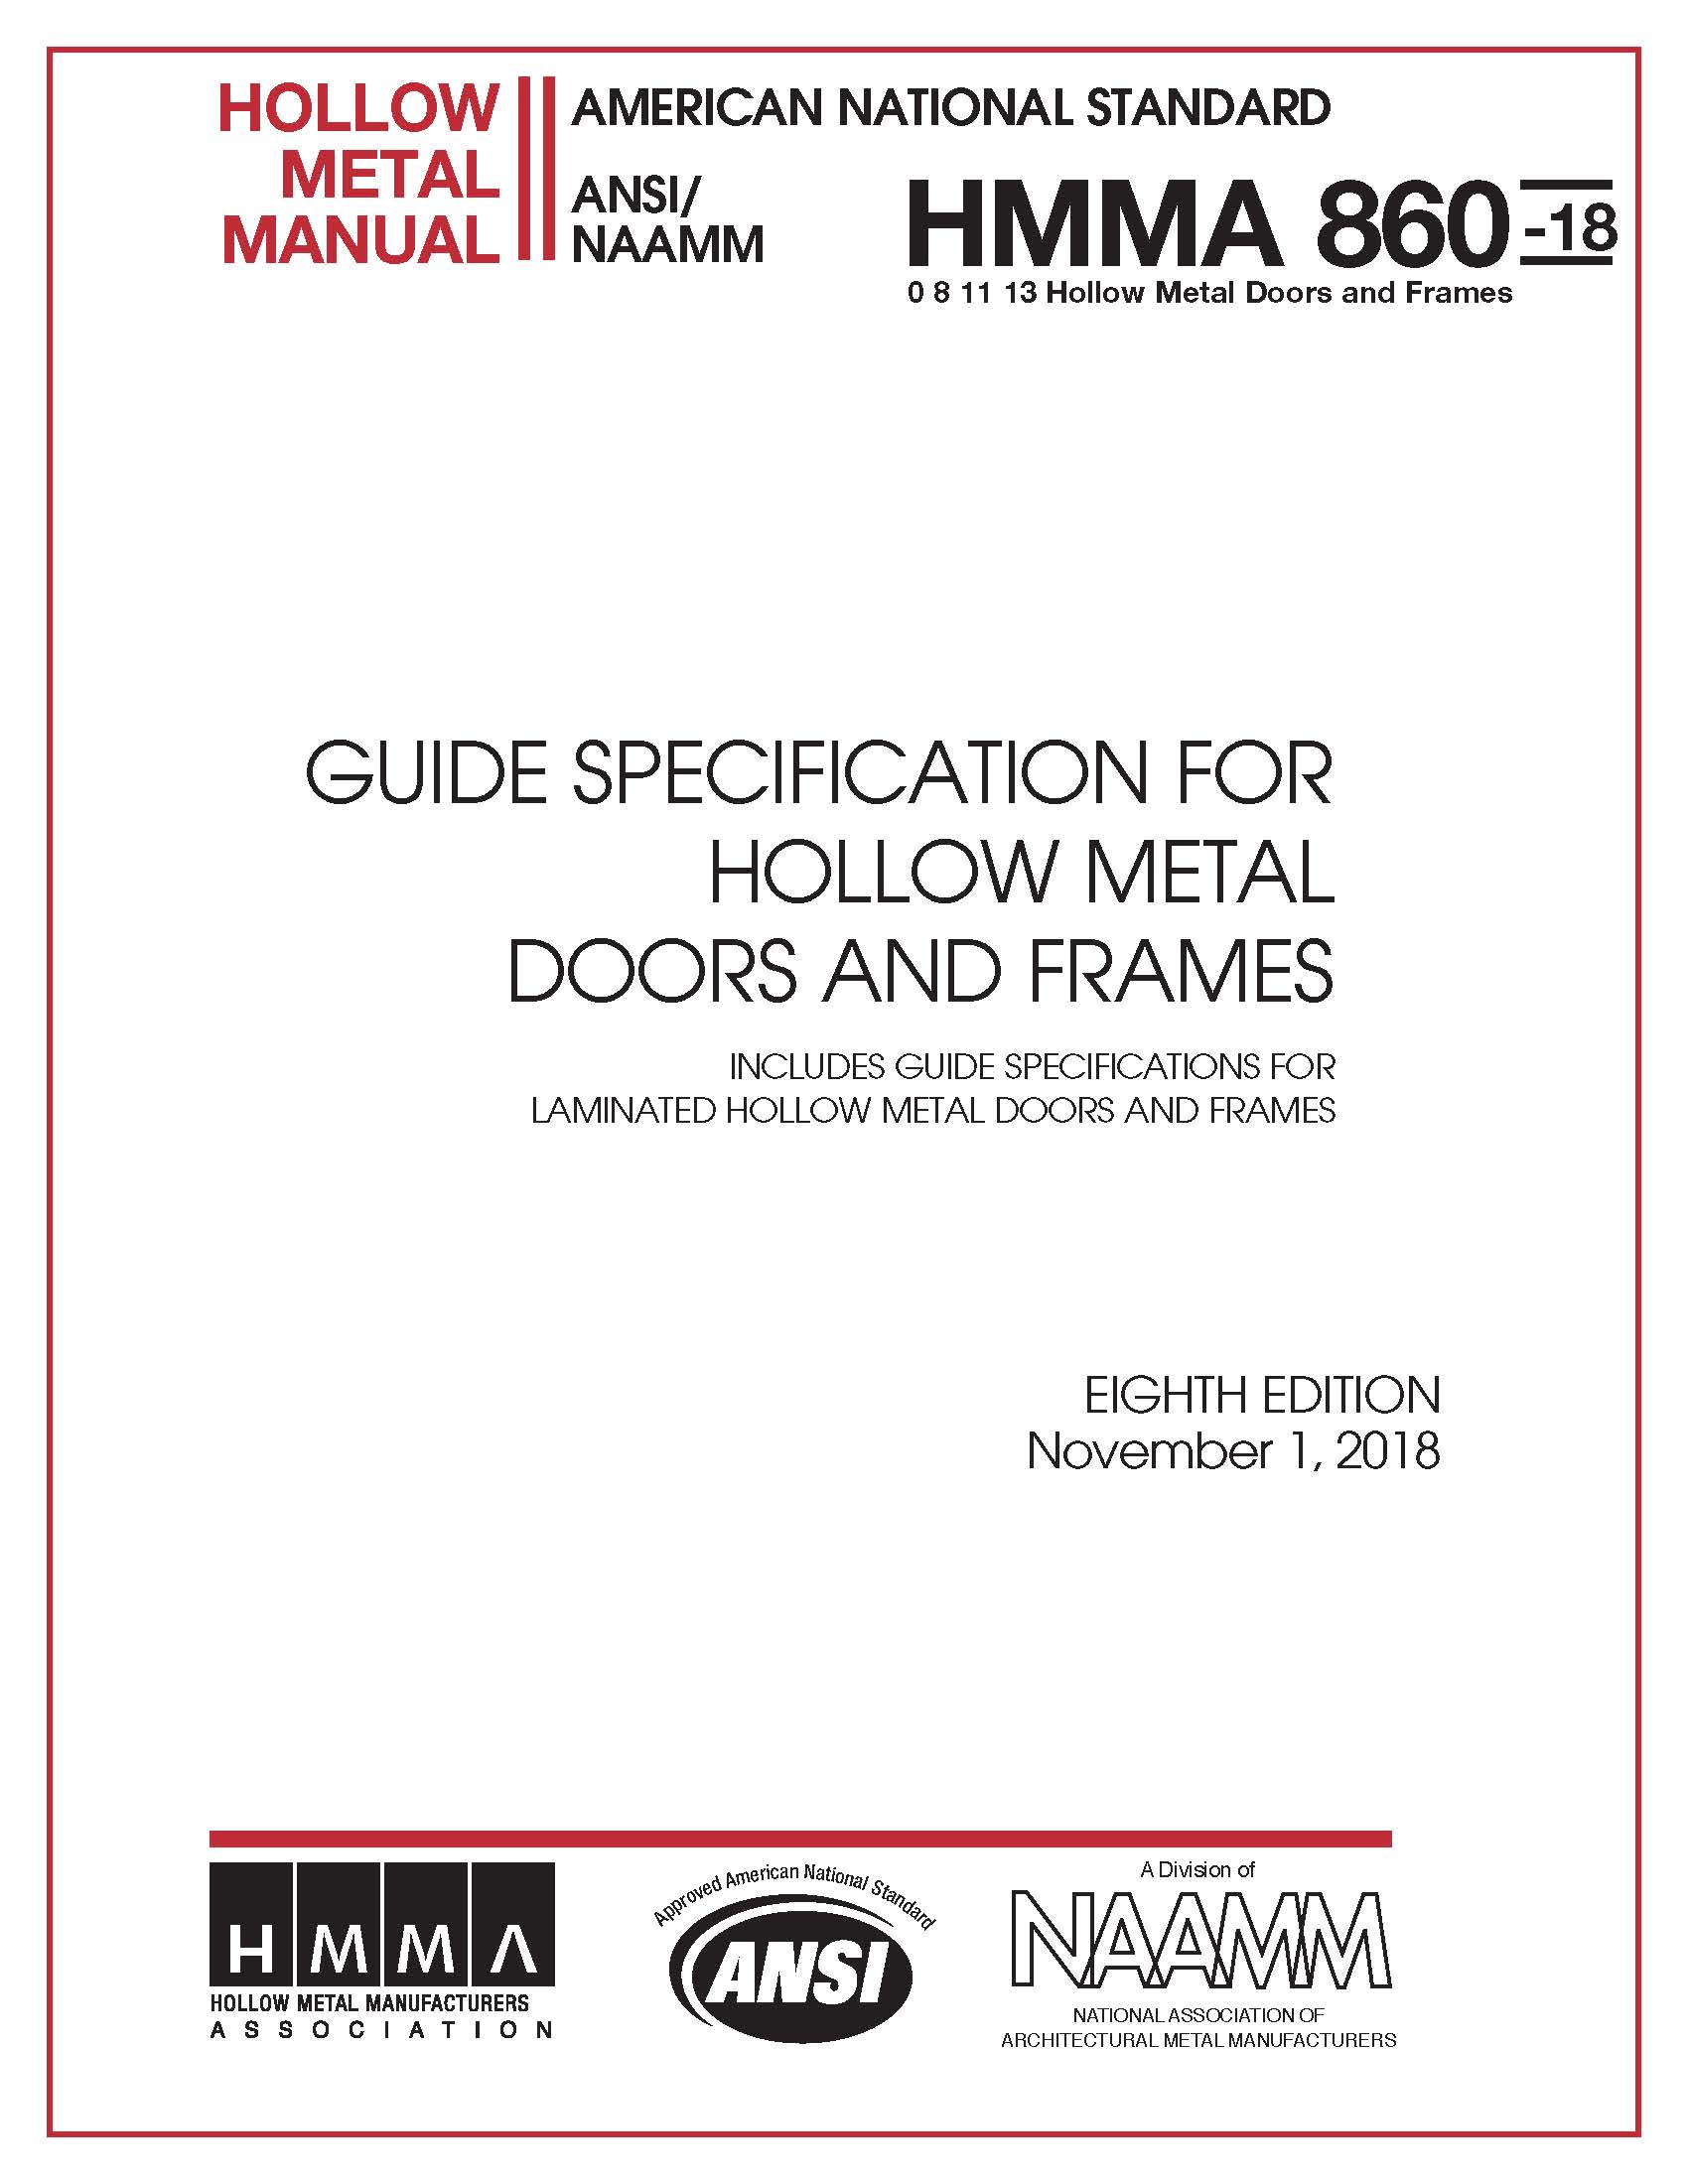 Guide Specifications For Hollow Metal Doors & Frames